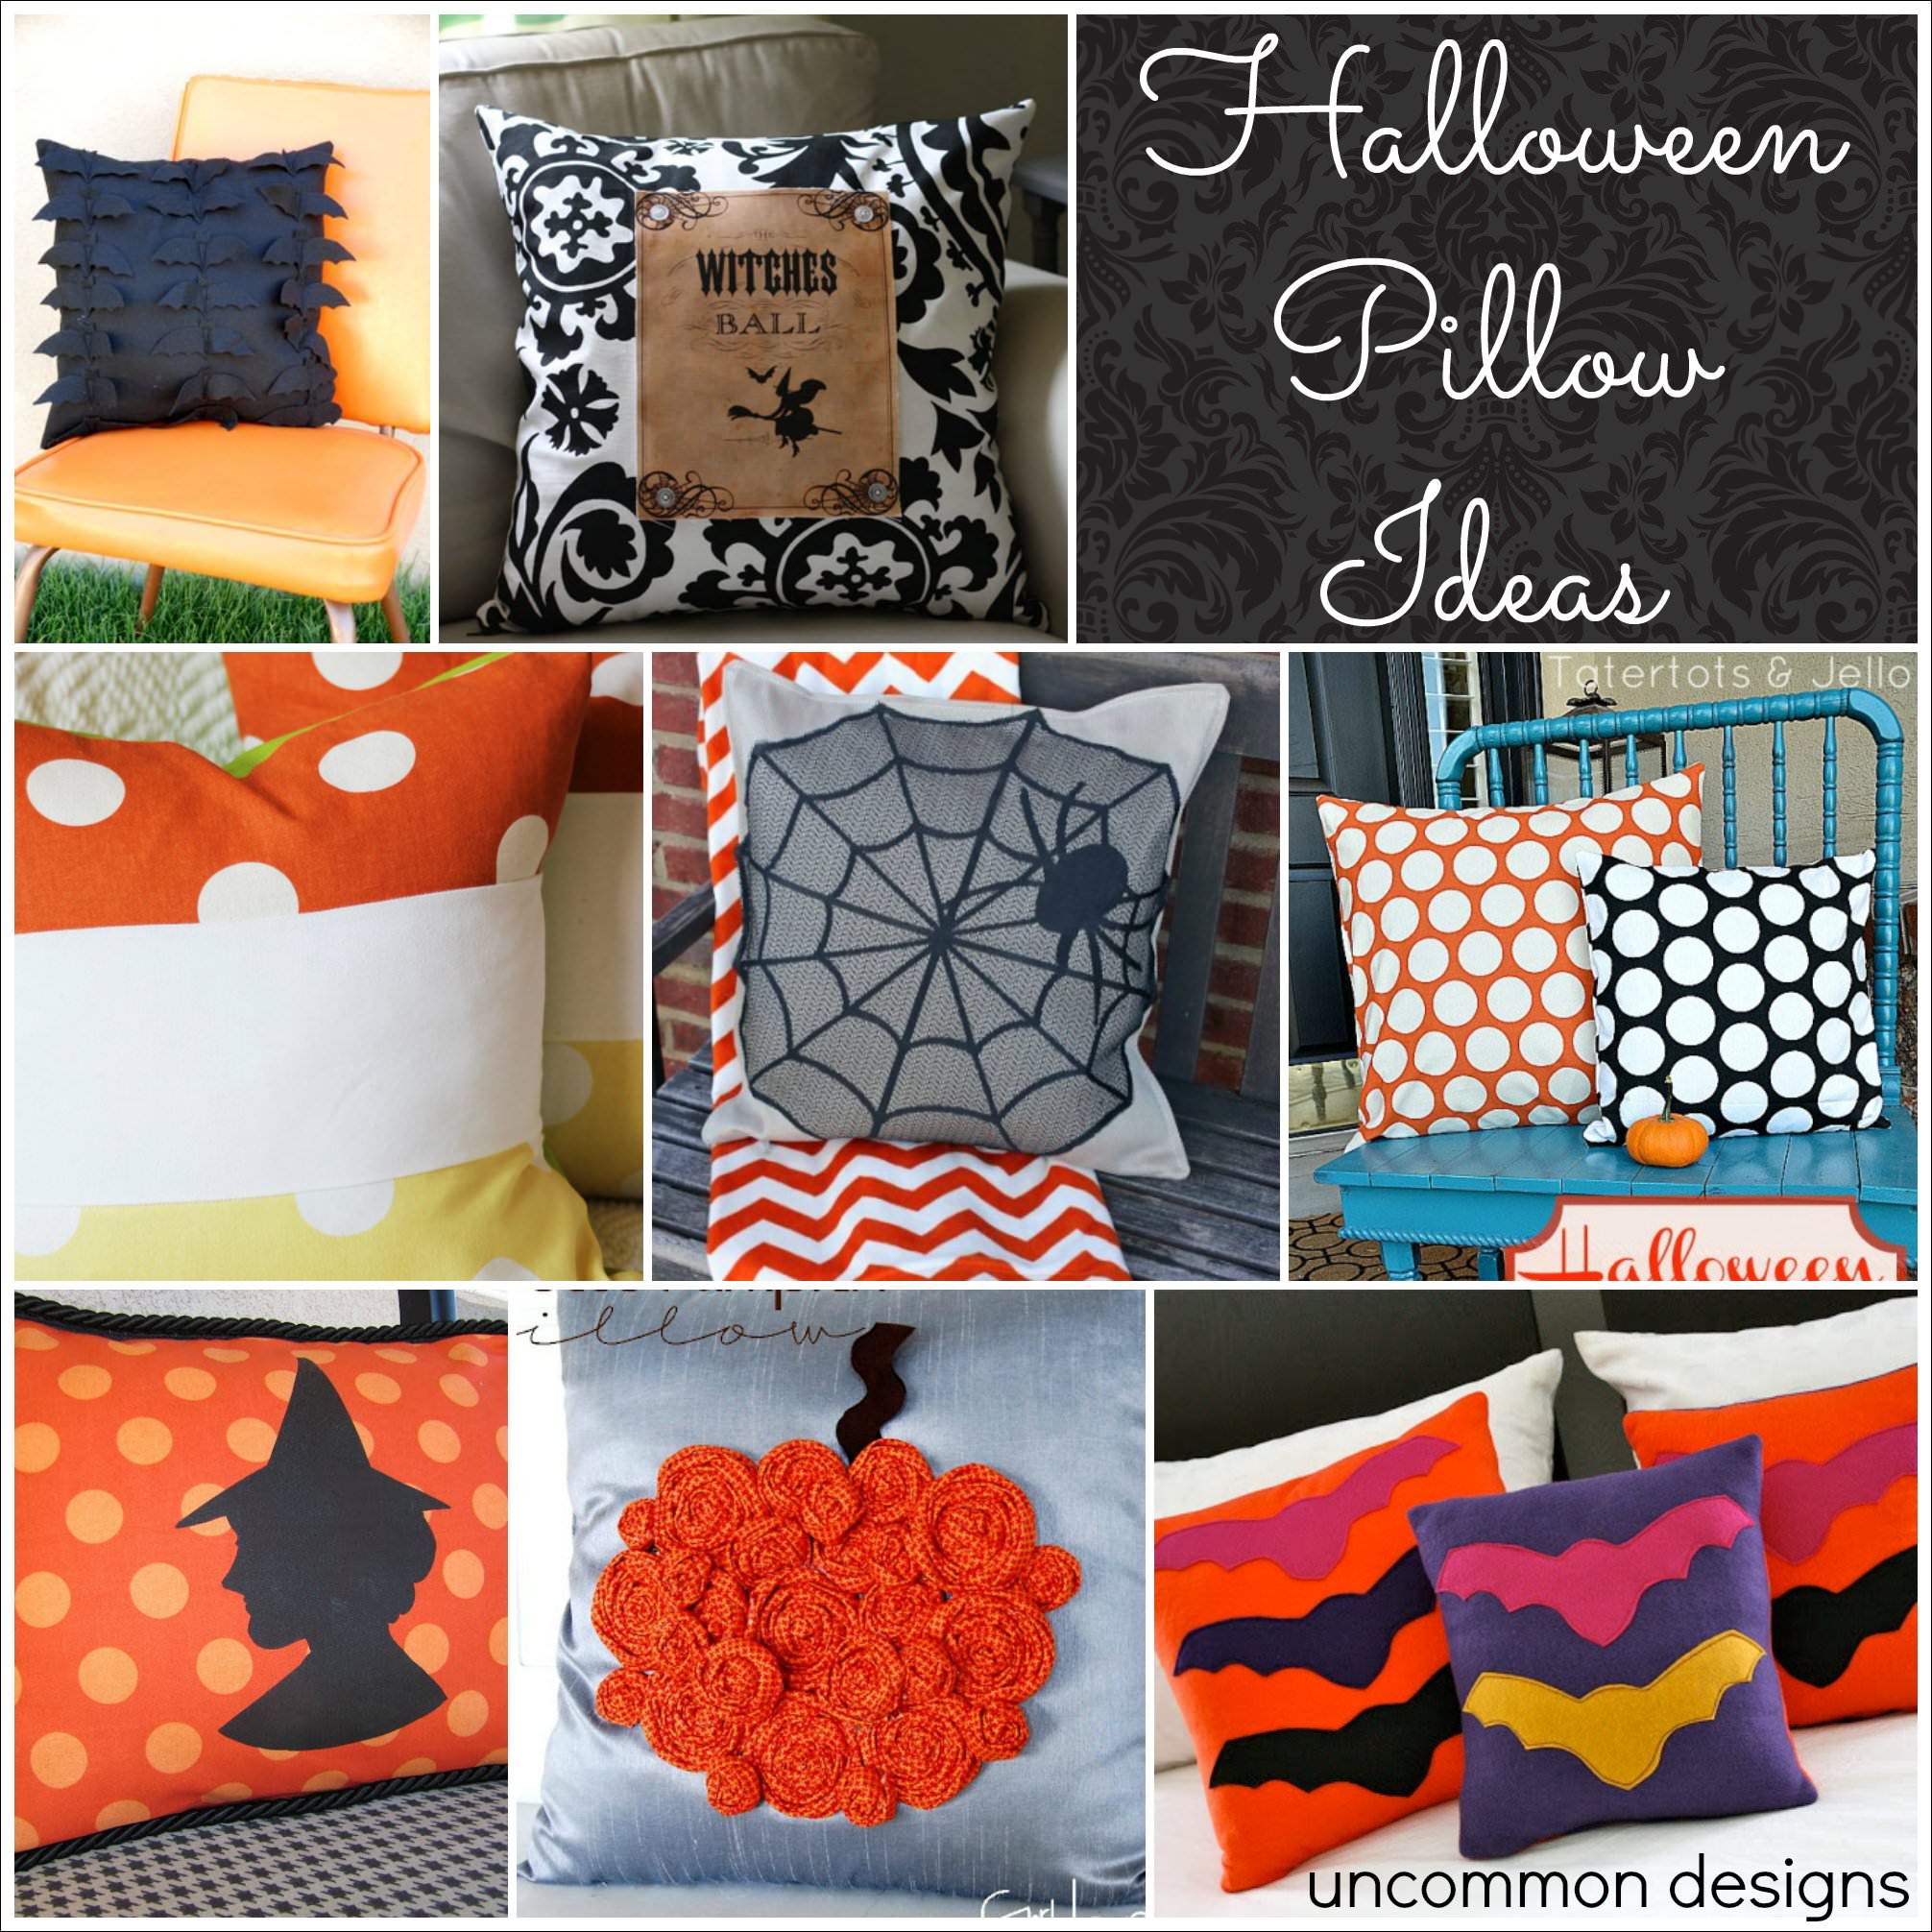 Favorite Things of the Week: Fall Animal Print Ideas! - Tatertots and Jello